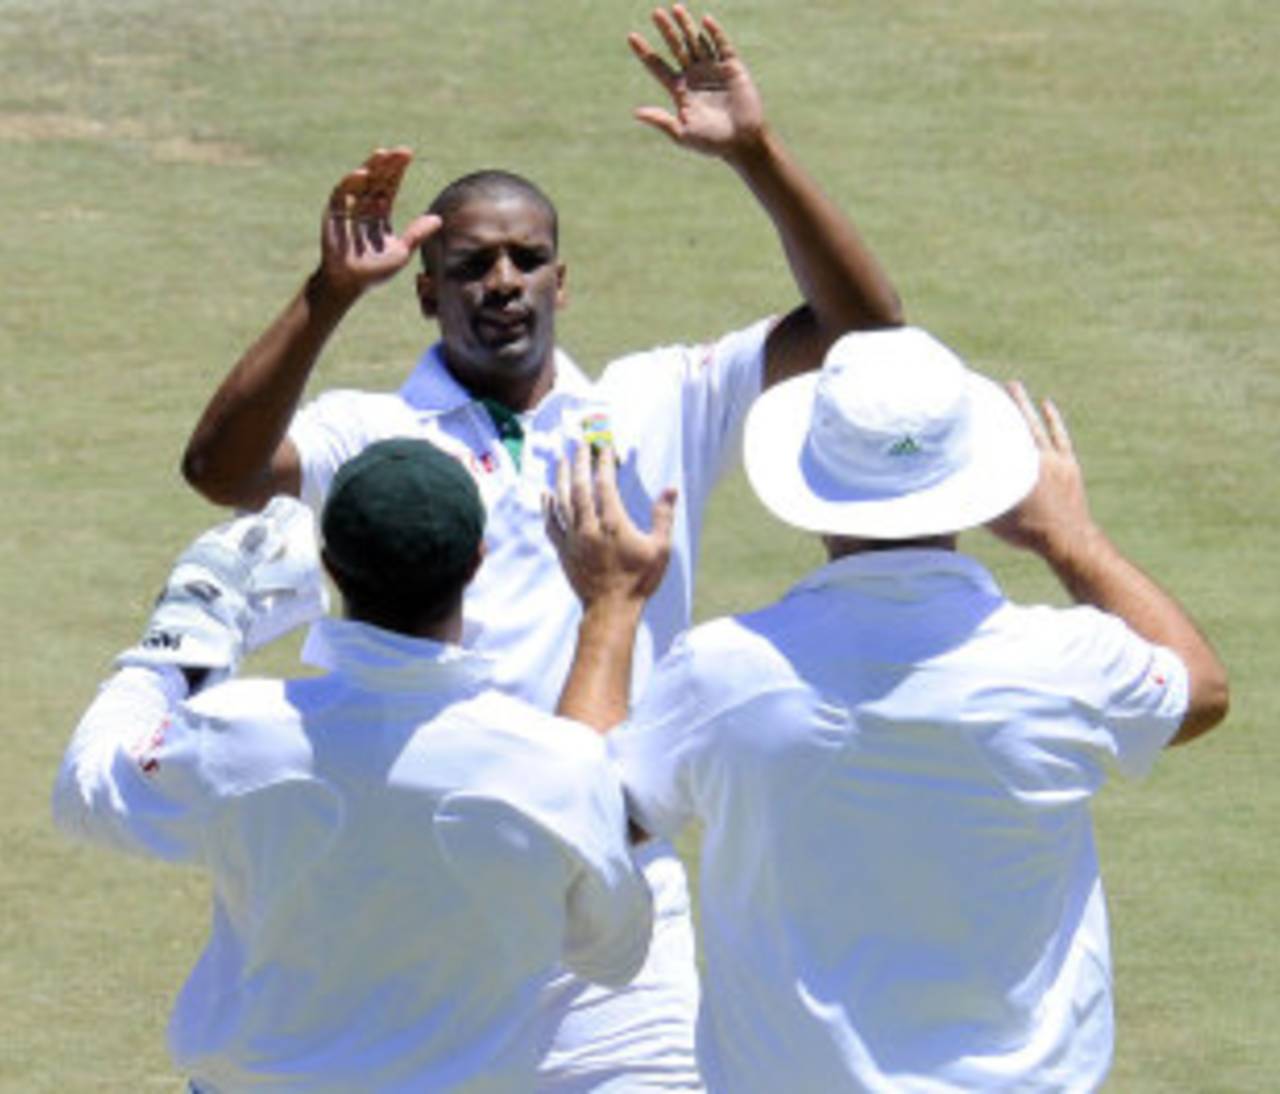 Vernon Philander ended Sri Lanka's pre-lunch defiance with two quick strikes, South Africa v Sri Lanka, 3rd Test, Cape Town, 4th day, January 6, 2012